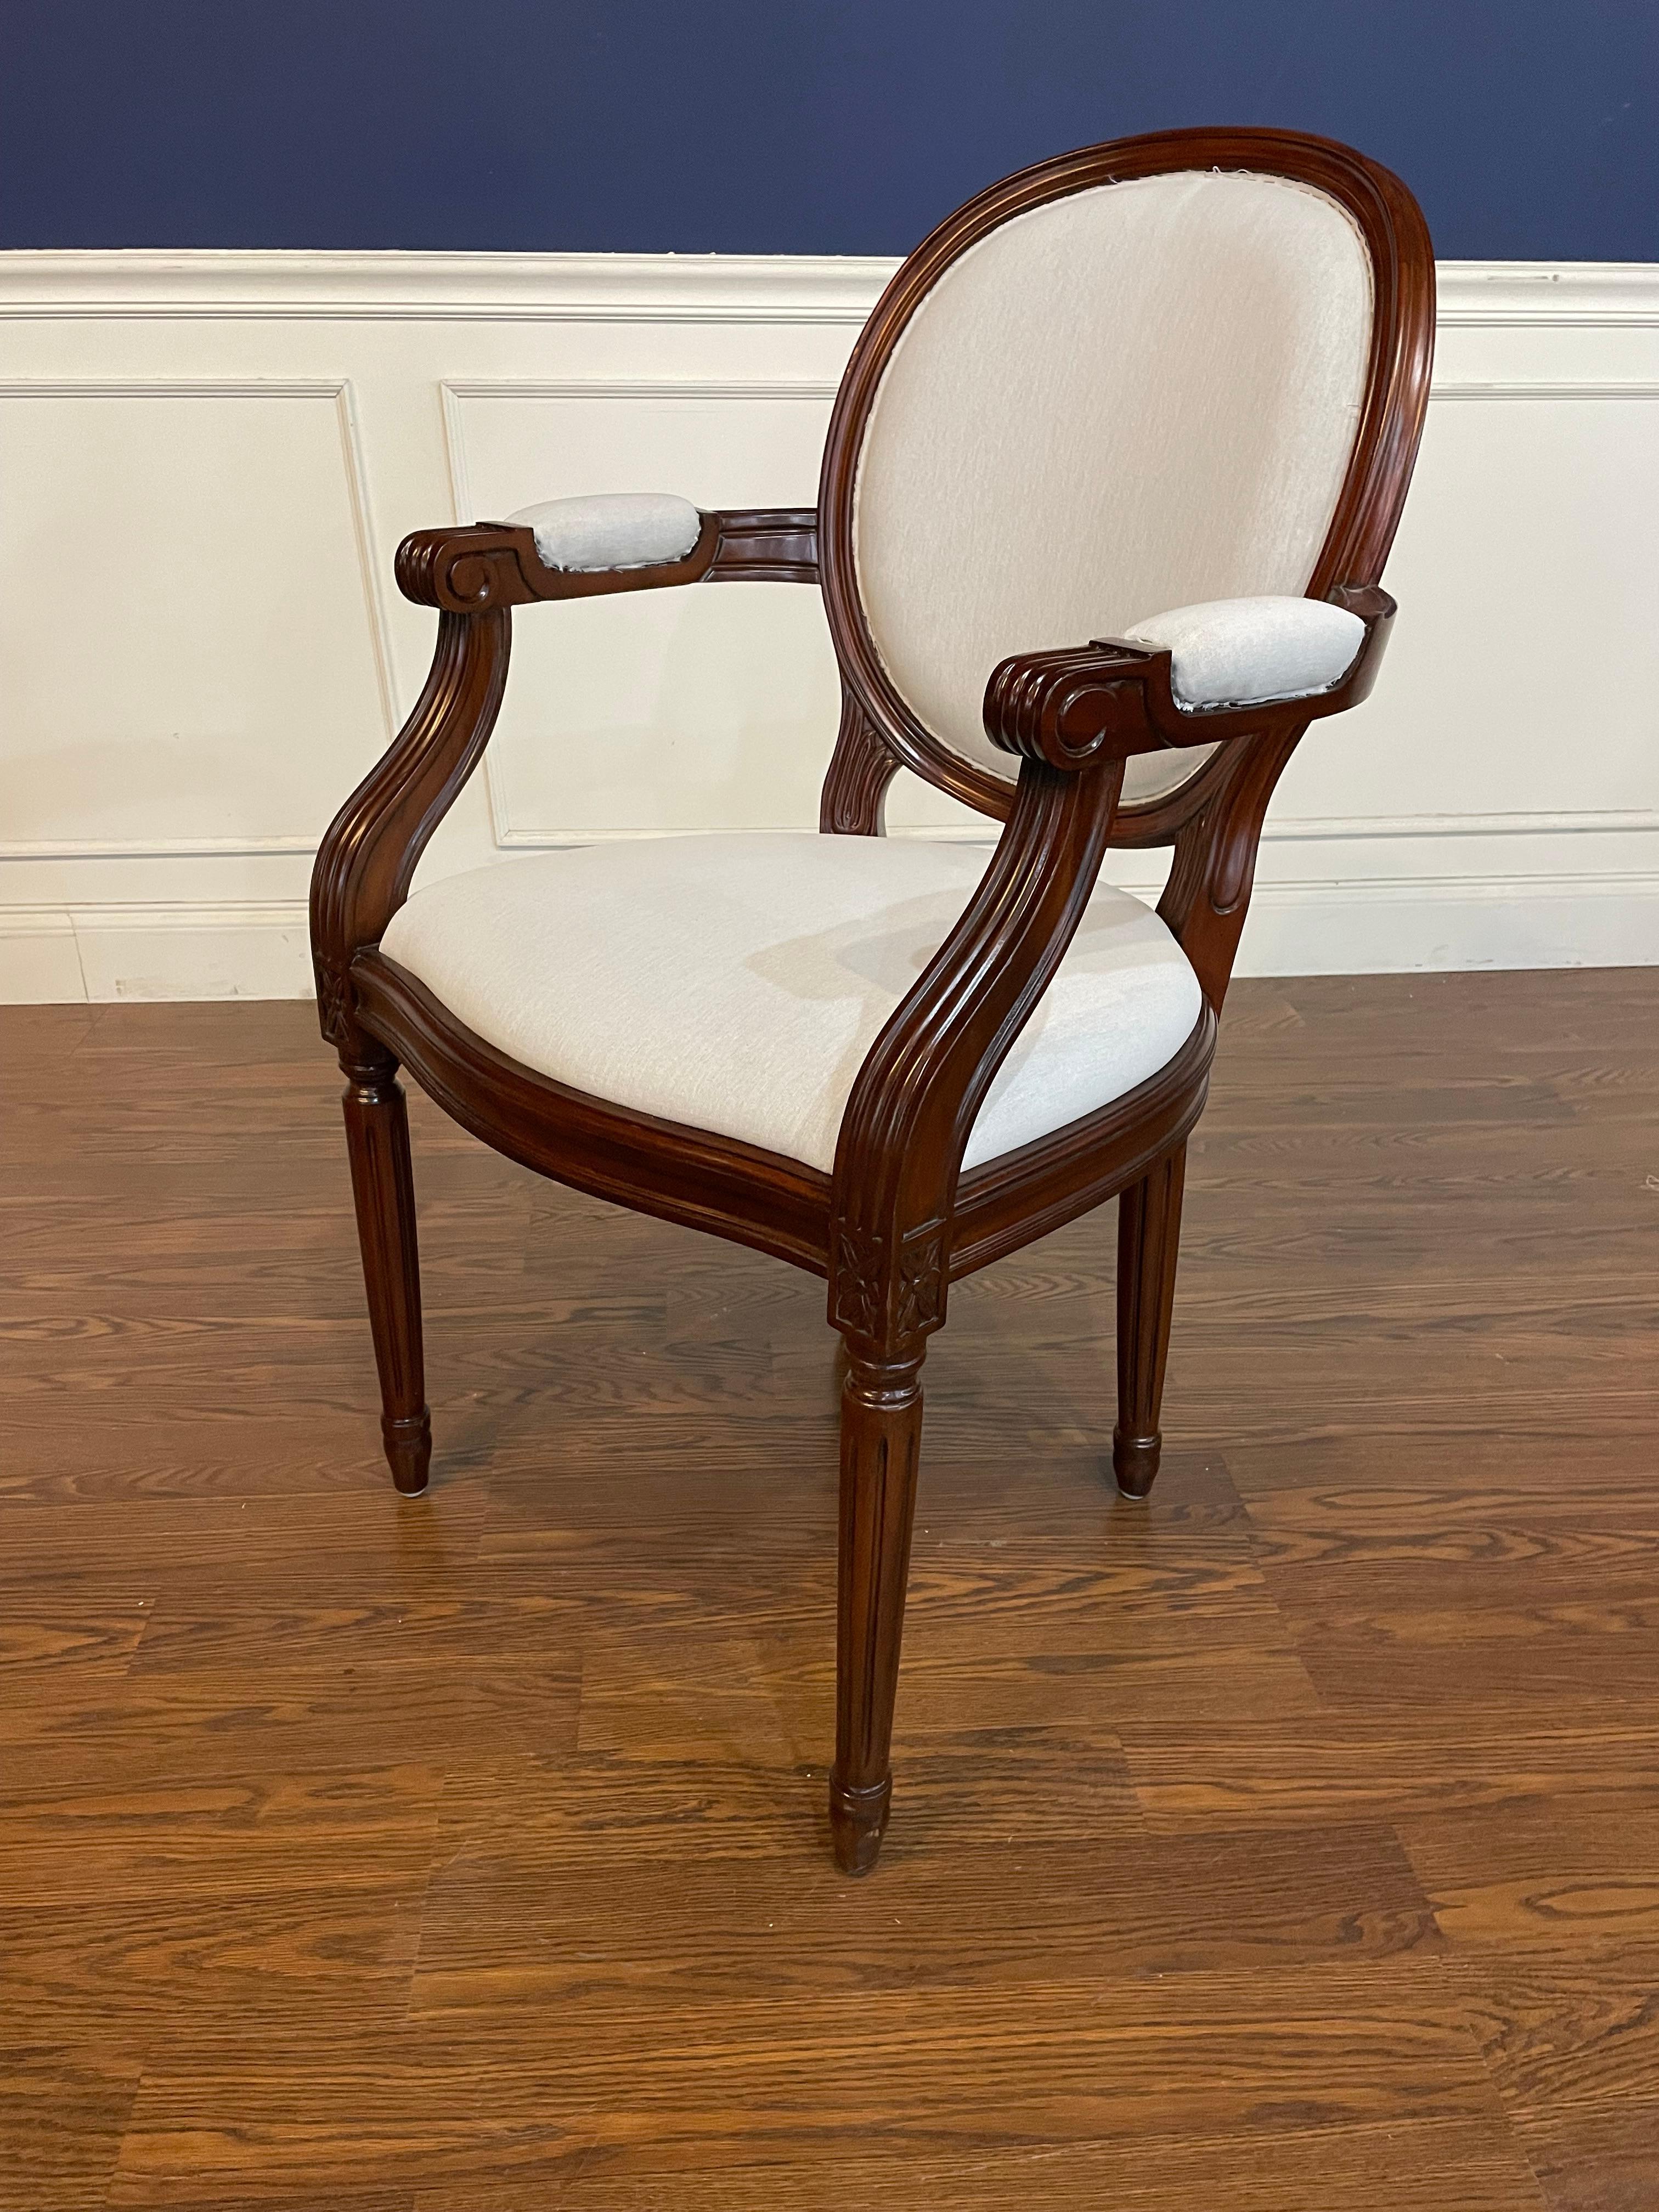 This is a set of eight (2 arms and 6 sides) of Louis XVI style mahogany dining chairs by Leighton Hall.  They have classic round backs and round fluted and tapered legs. They have a medium brown mahogany color with a satin/semigloss sheen.  They